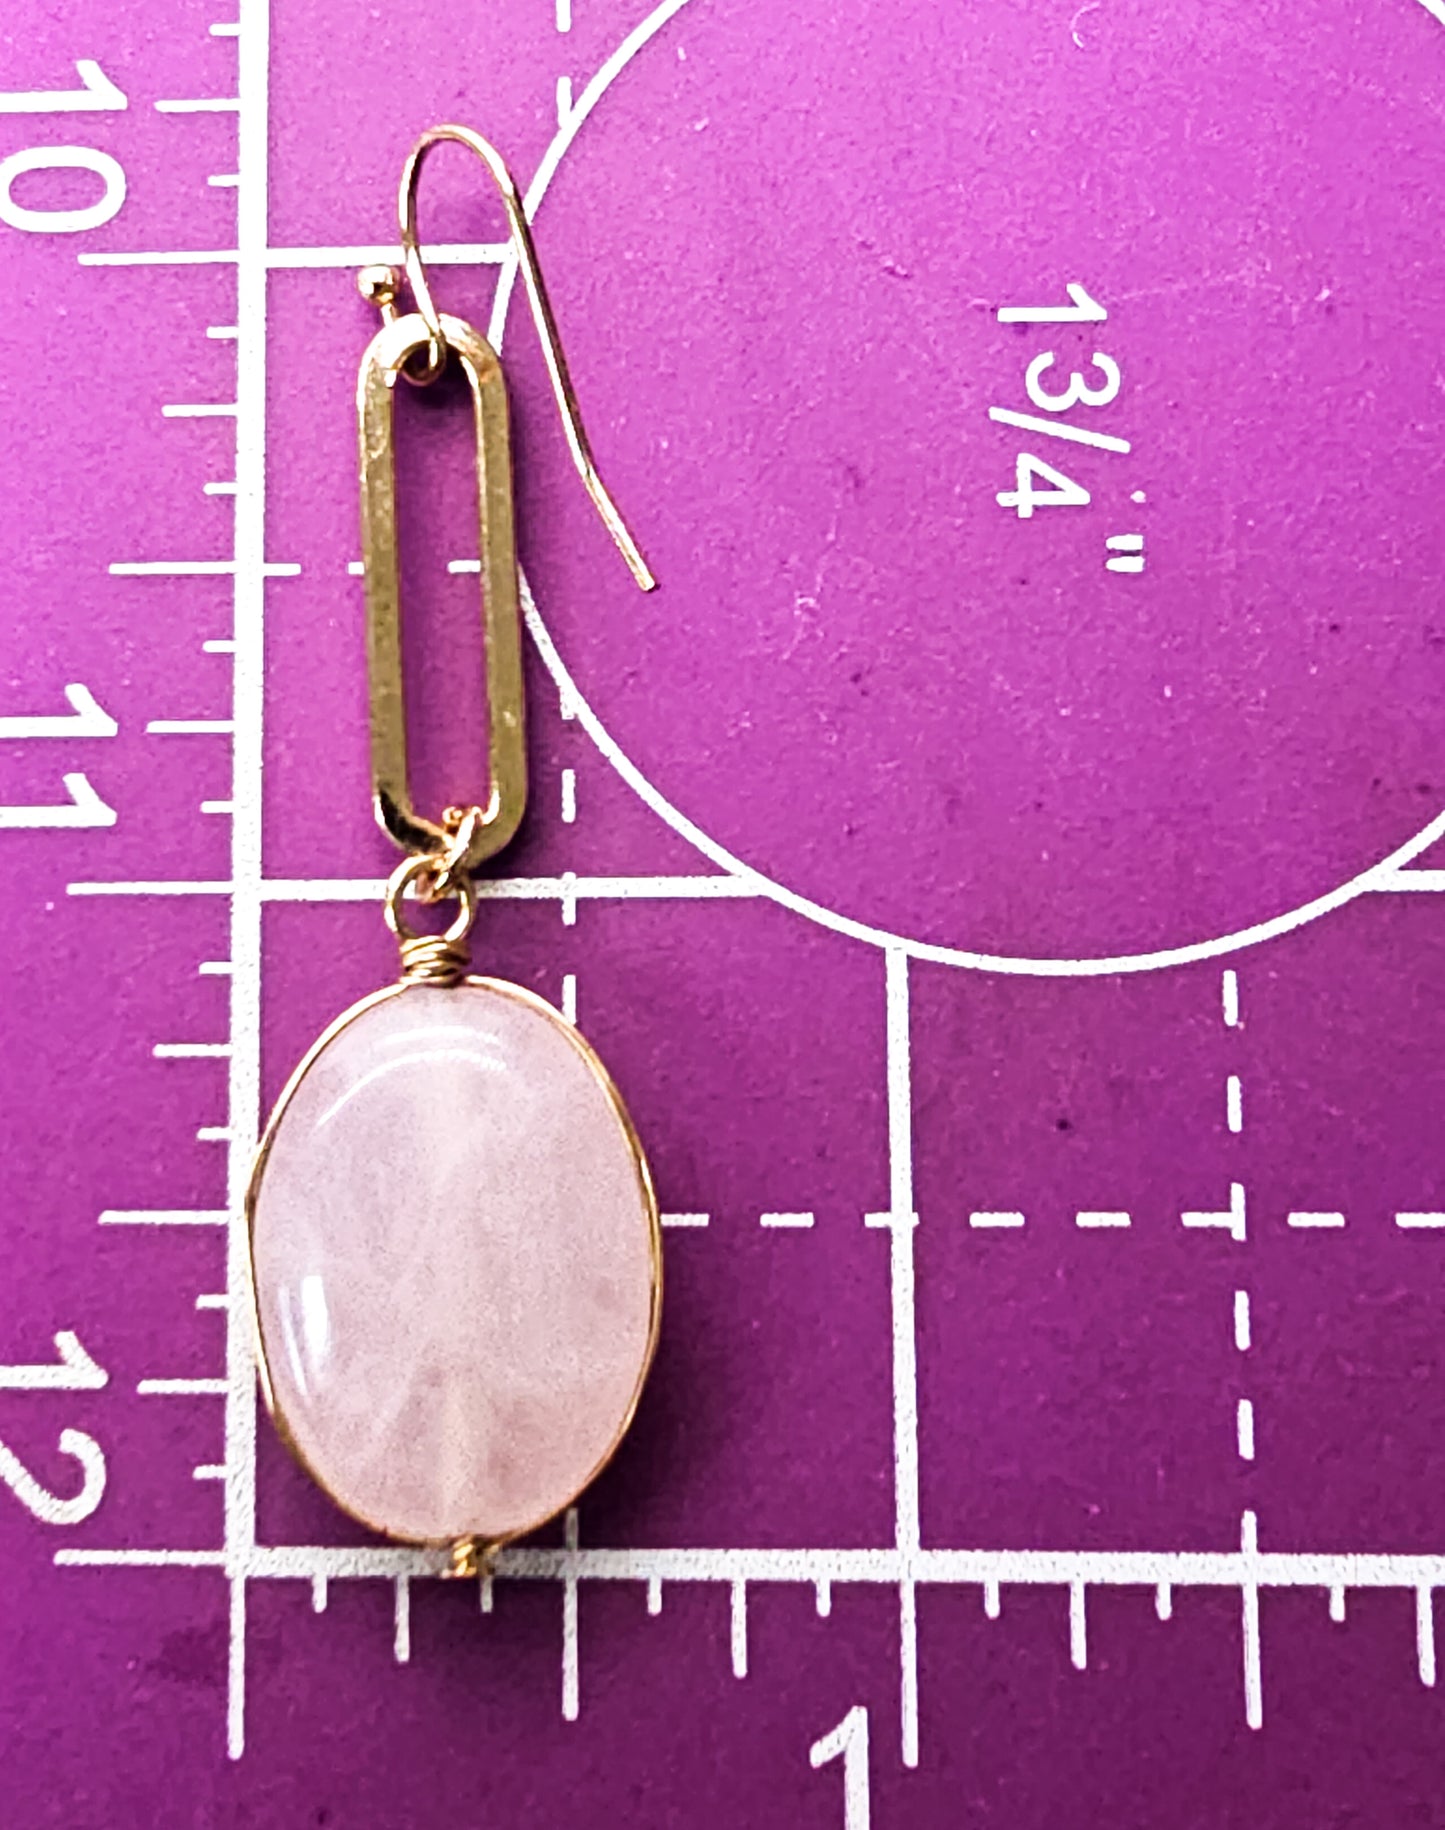 Rose quartz abstract gold overlay vintage sterling silver drop earrings